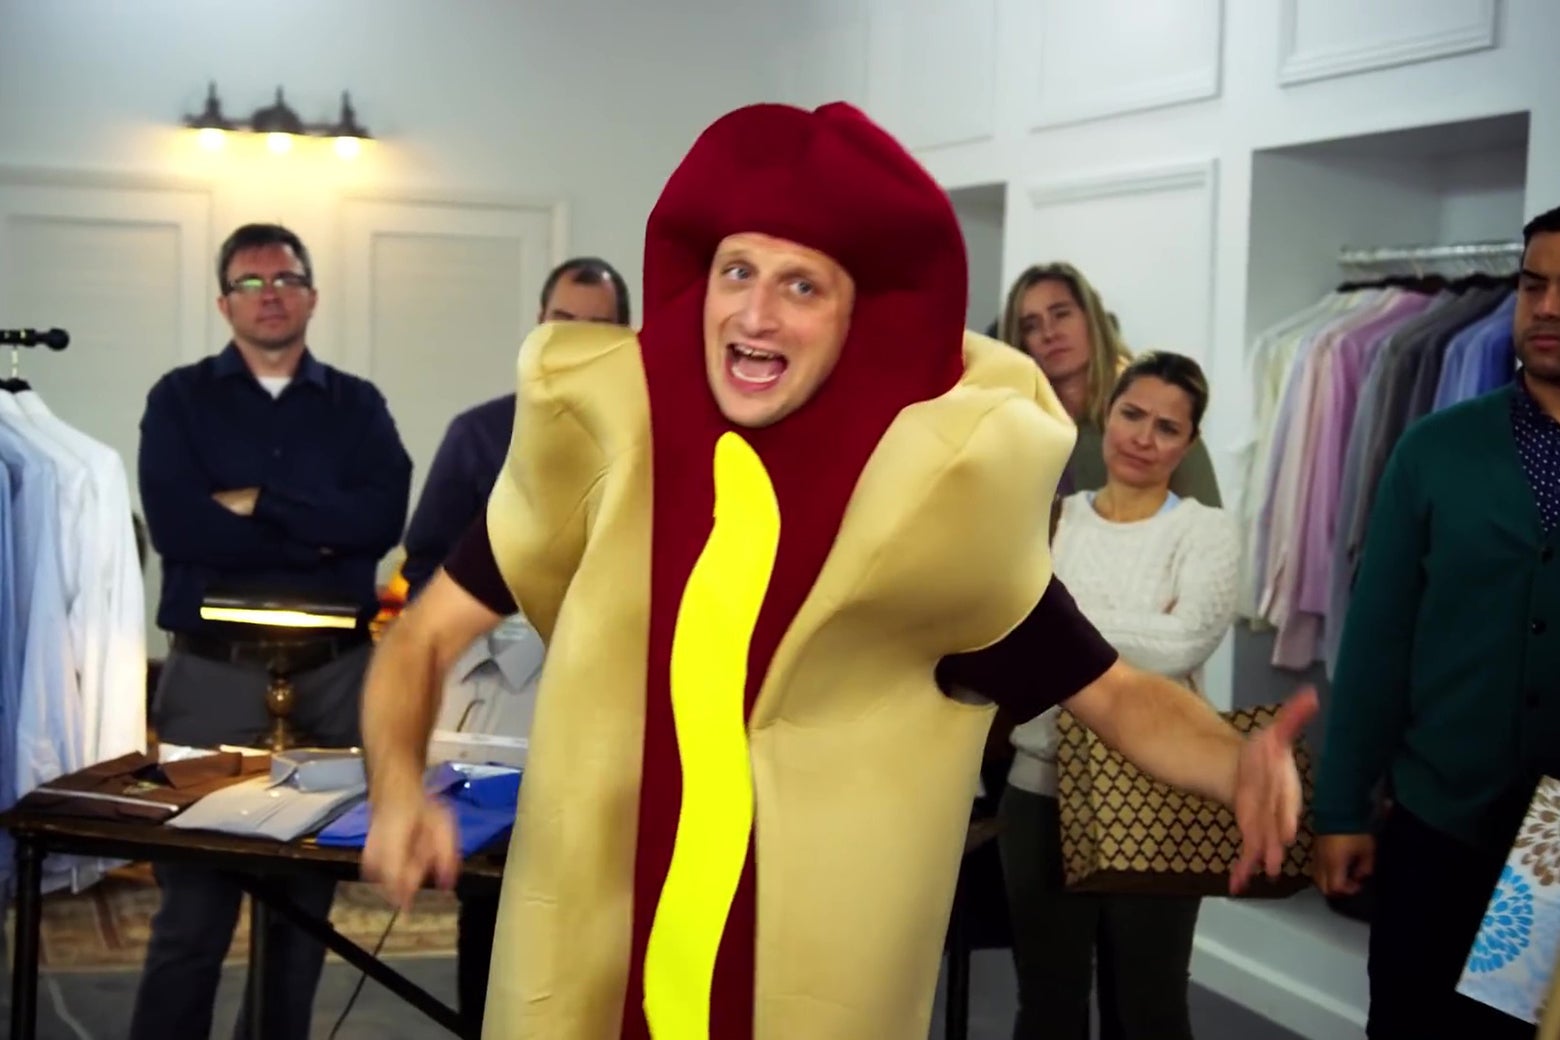 A man in a hot-dog costume stands amid a group of accusing people.